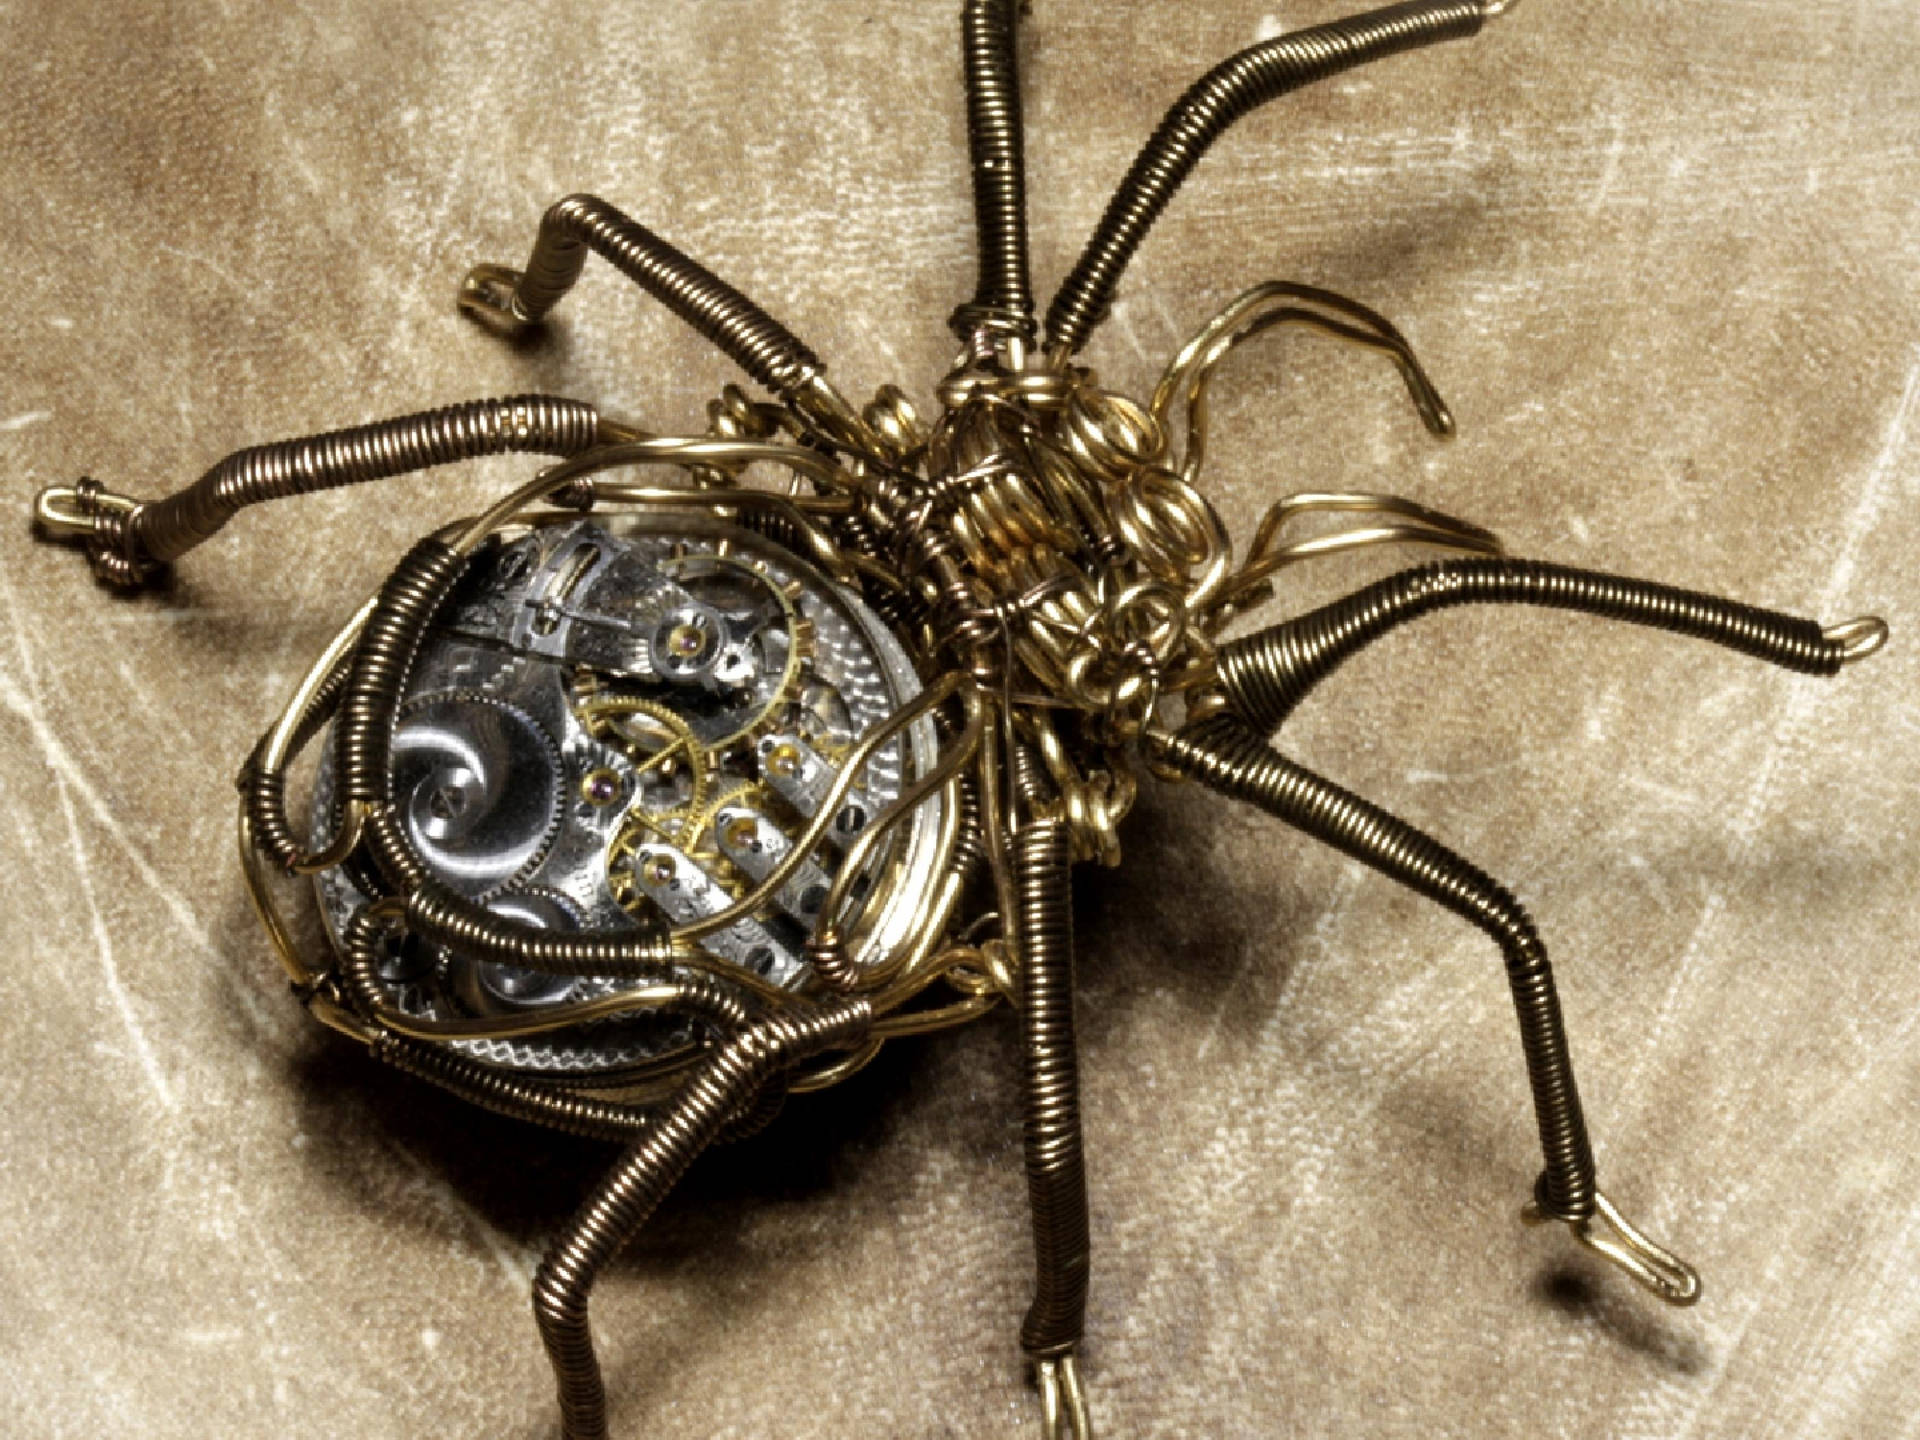 Spider With Mechanical Pieces